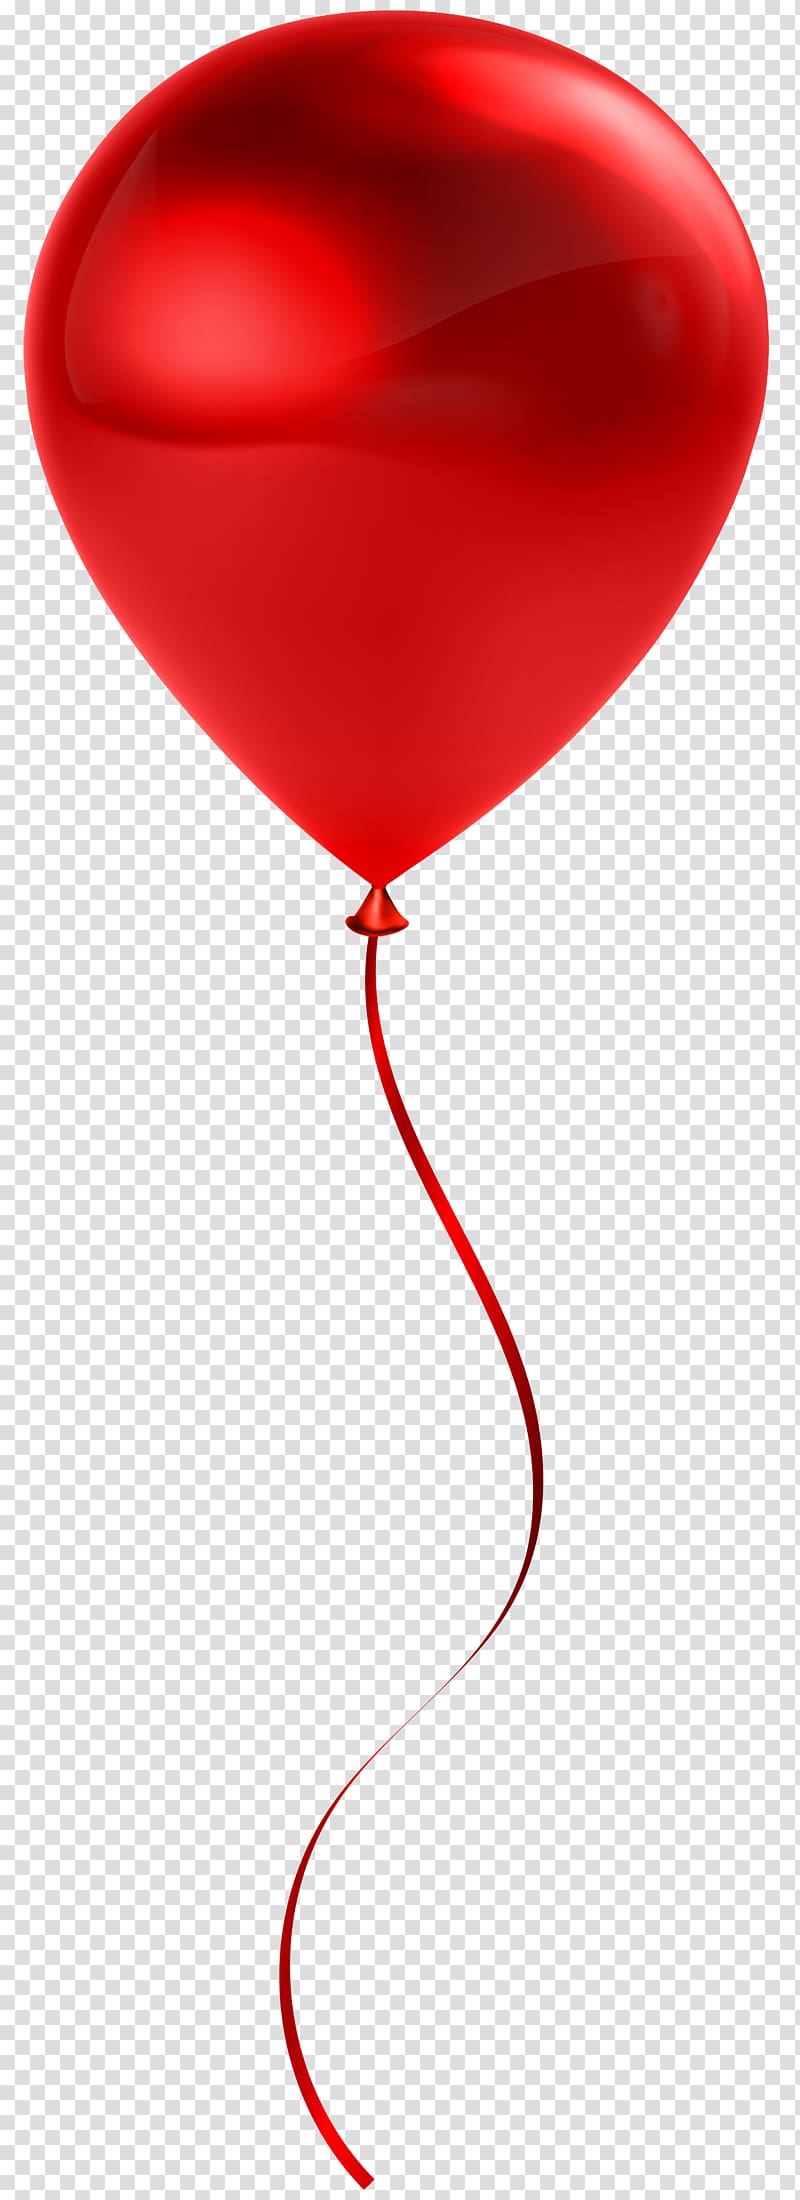 red balloon illustration, Red Balloon Heart Design, Single Red Balloon transparent background PNG clipart